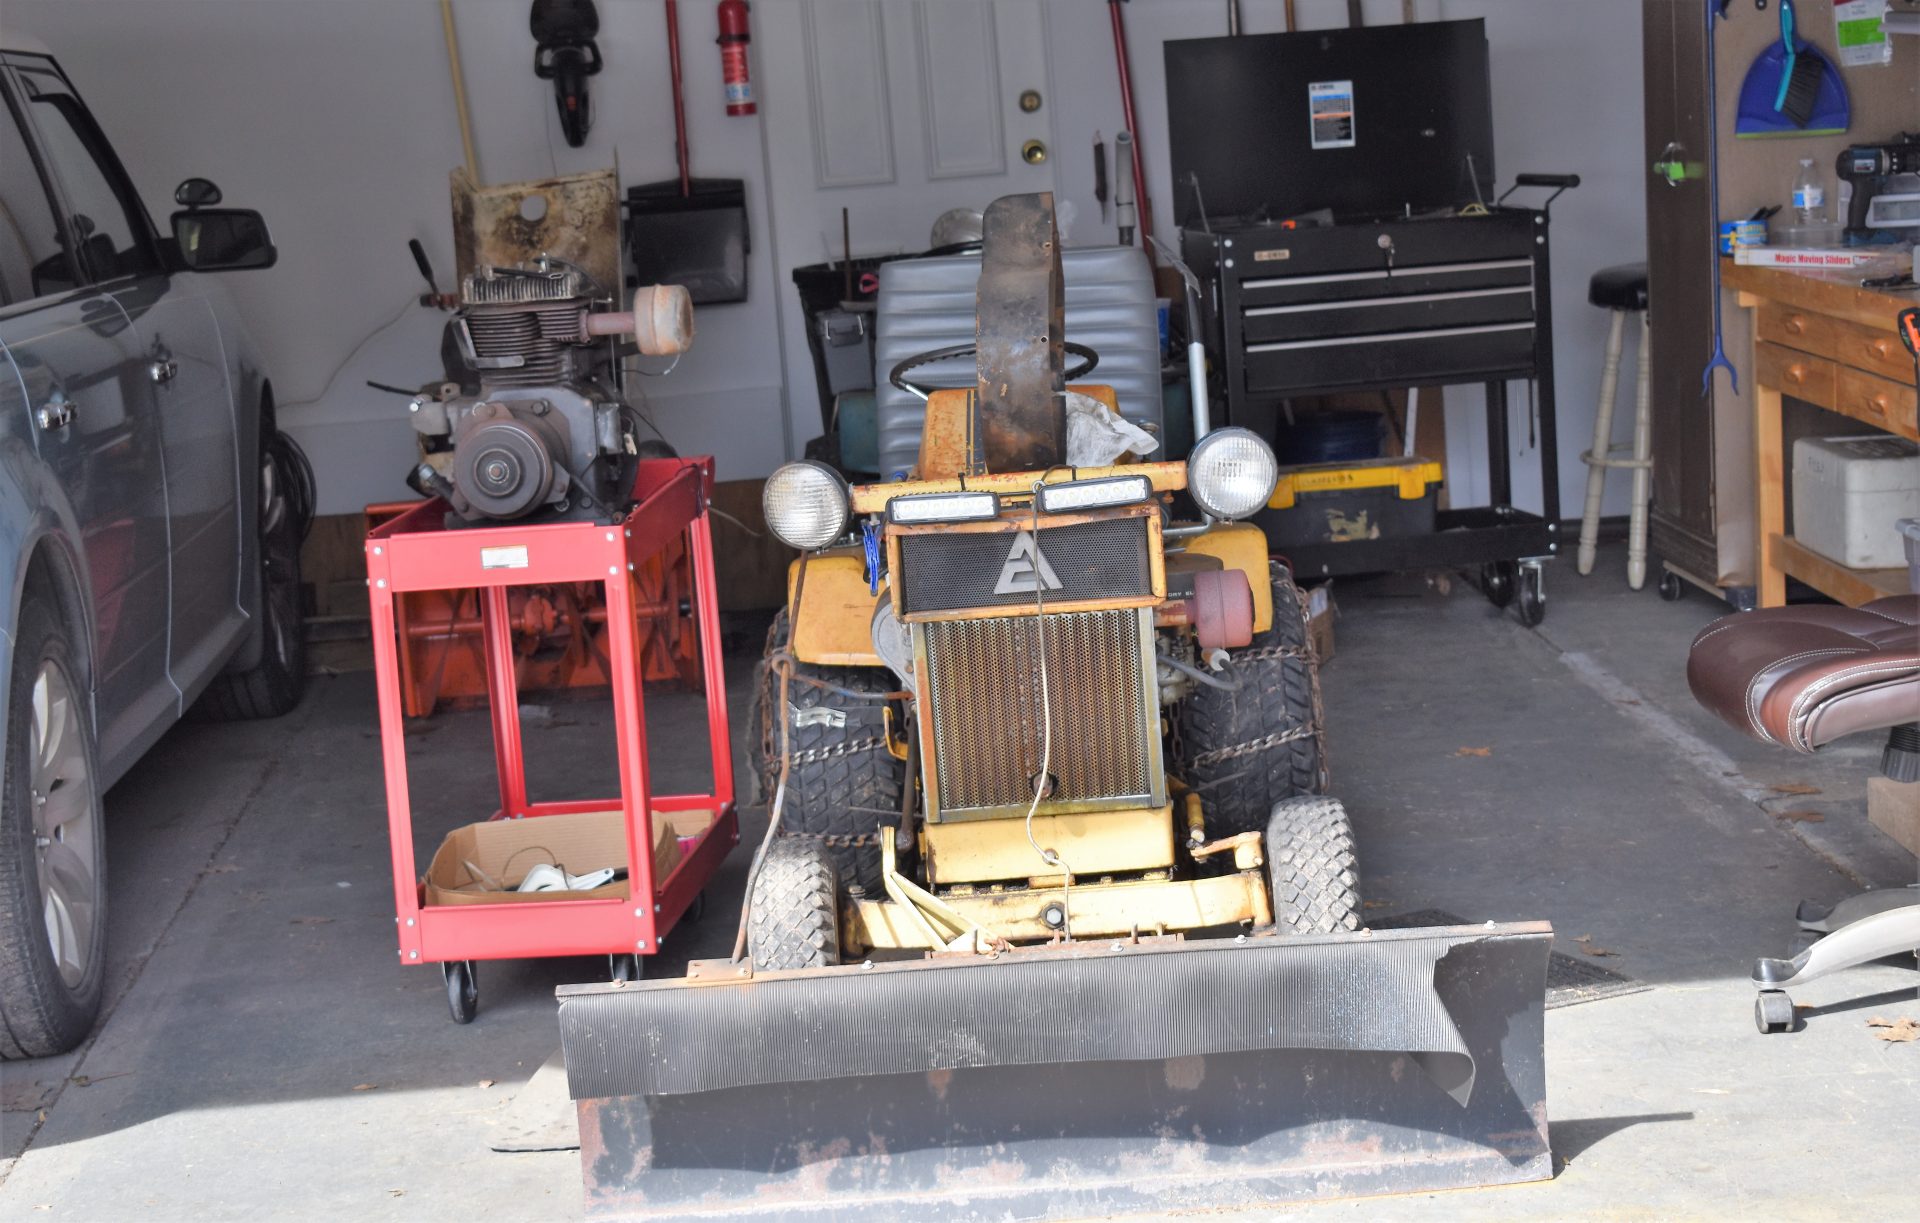 One of Bob Smith's little tractors is seen in his garage on March 11, 2019.